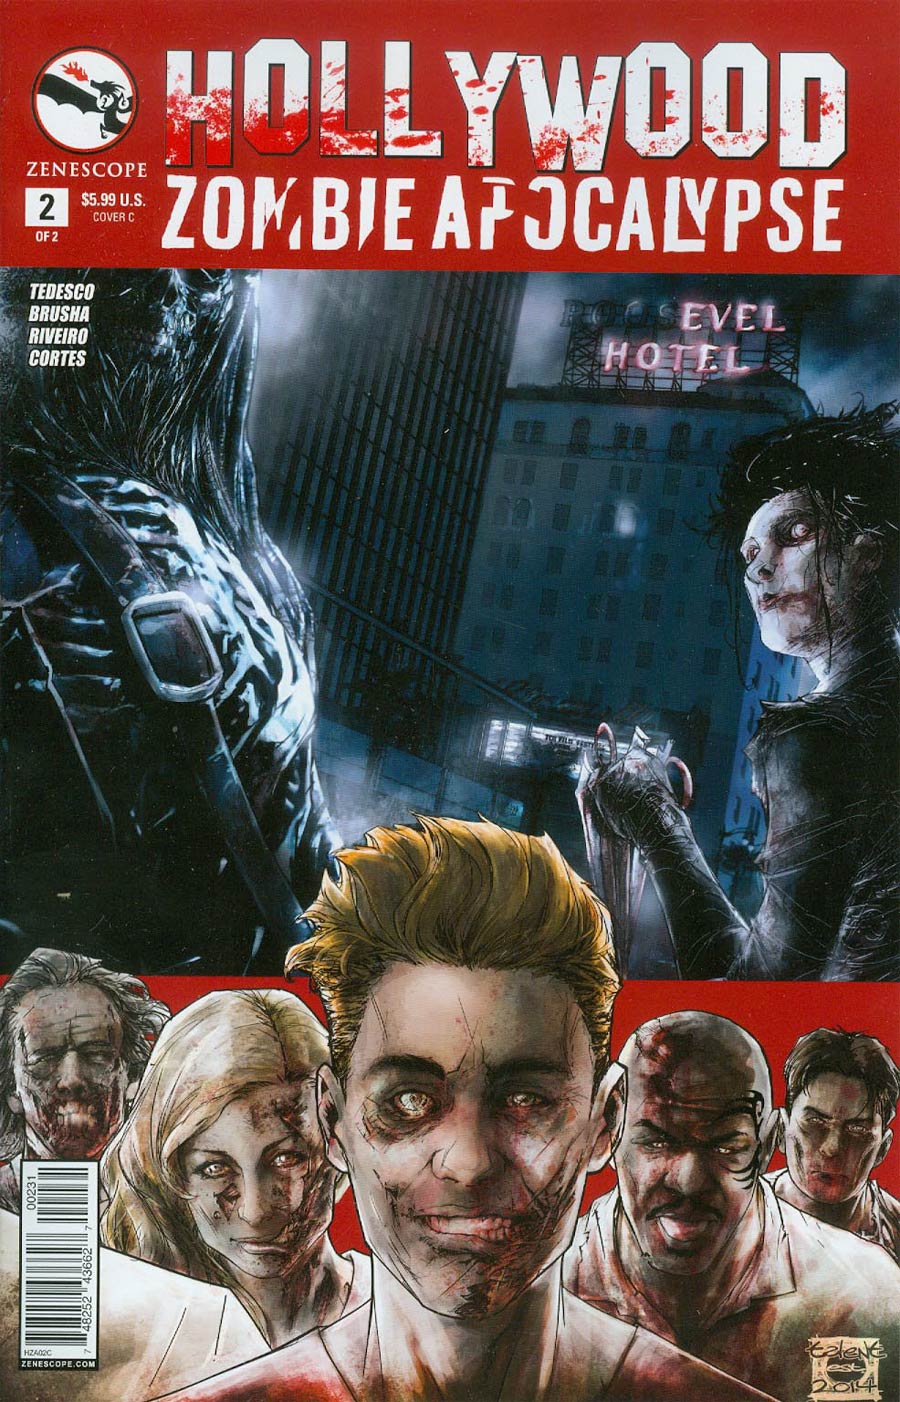 Hollywood Zombie Apocalypse #2 Cover C Variant Talent Caldwell Cover